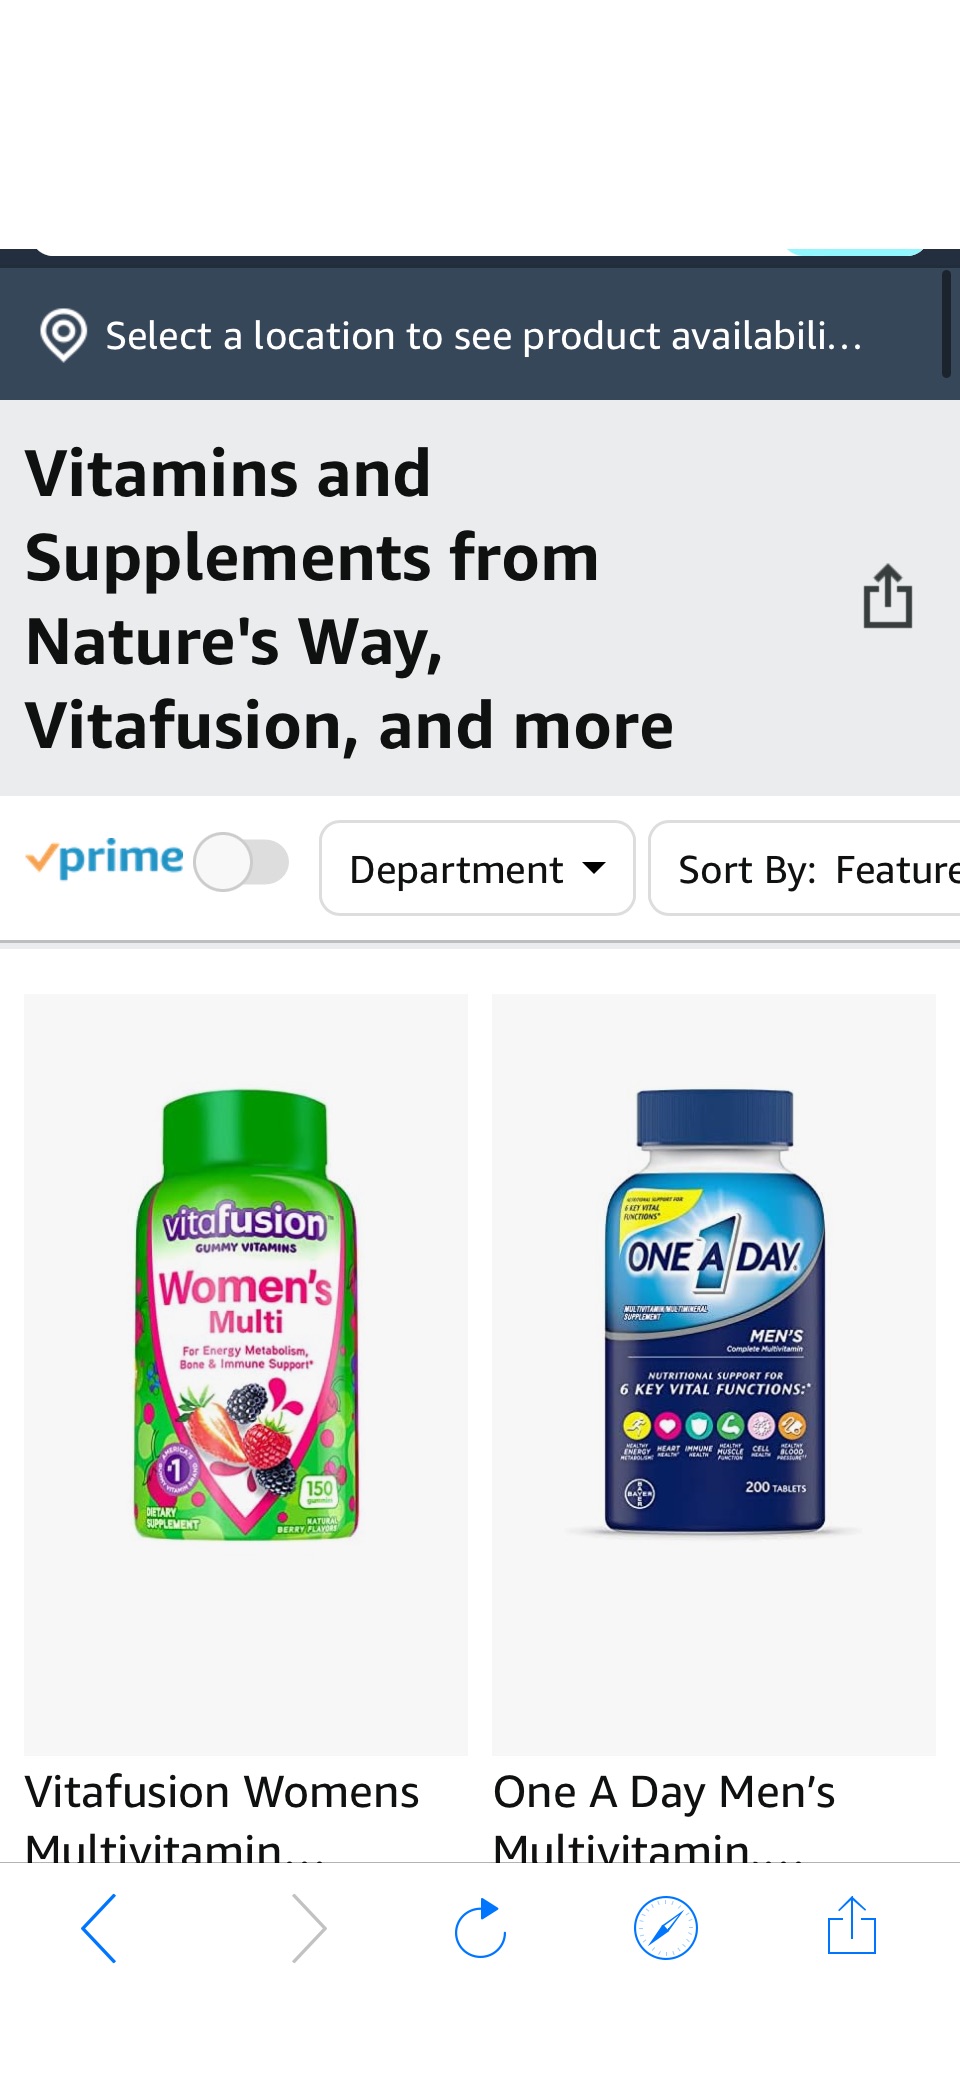 Vitamins and Supplements from Nature's Way, Vitafusion, and more促销6.89起